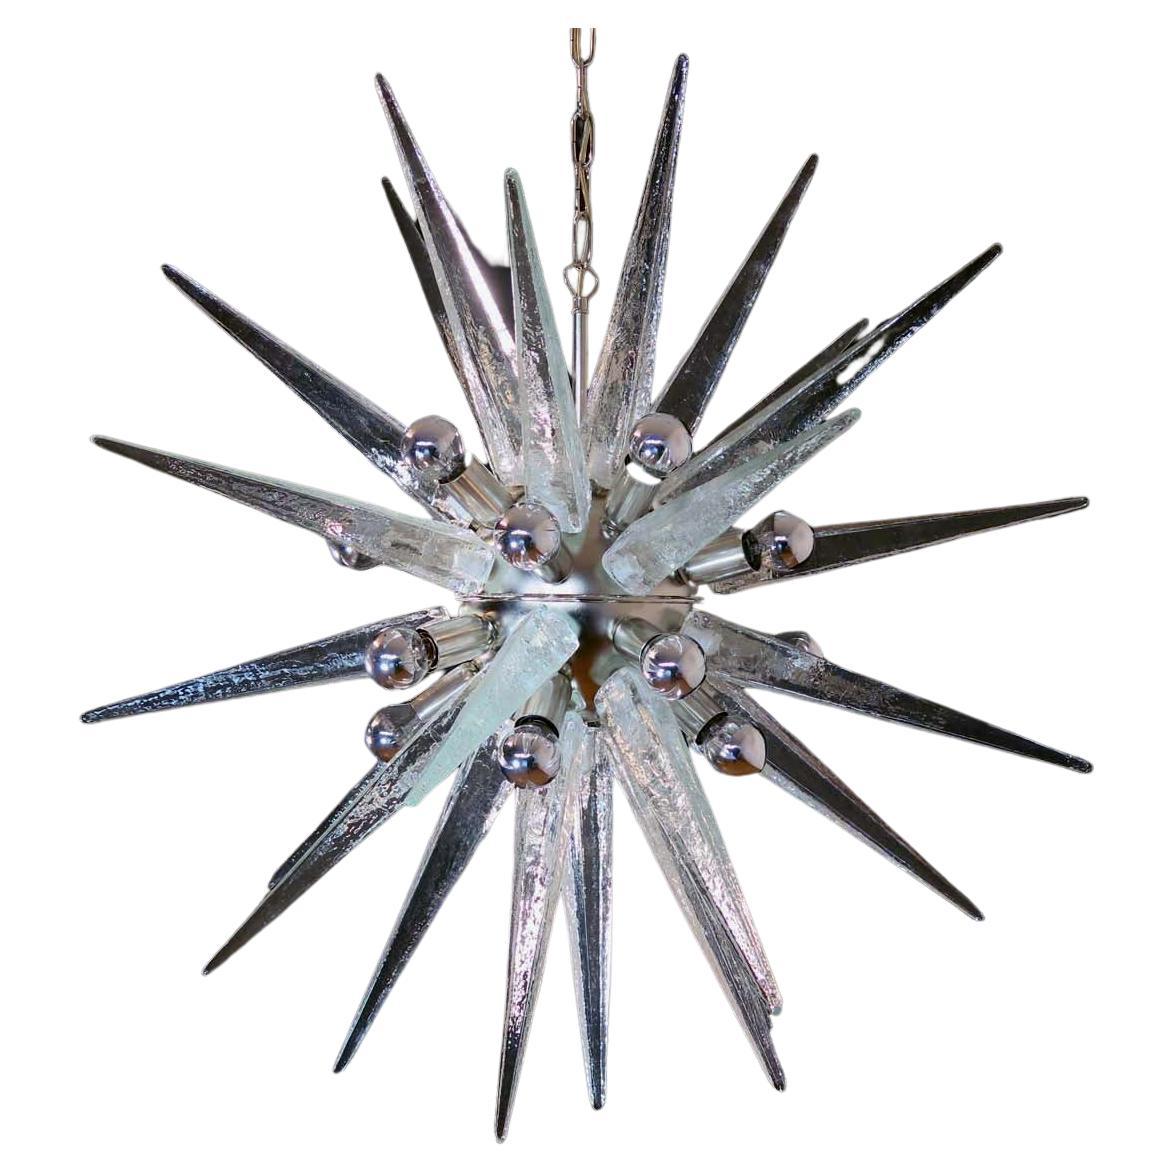 Italian Sputnik chandelier in a nickel frame, clear Murano glass (31 elements). Murano blown glass in a traditional way. 20 light points.
Period: late XX century 
Dimensions: 51,20 inches (130 cm) height with chain; 31,50 inches (80 cm) height